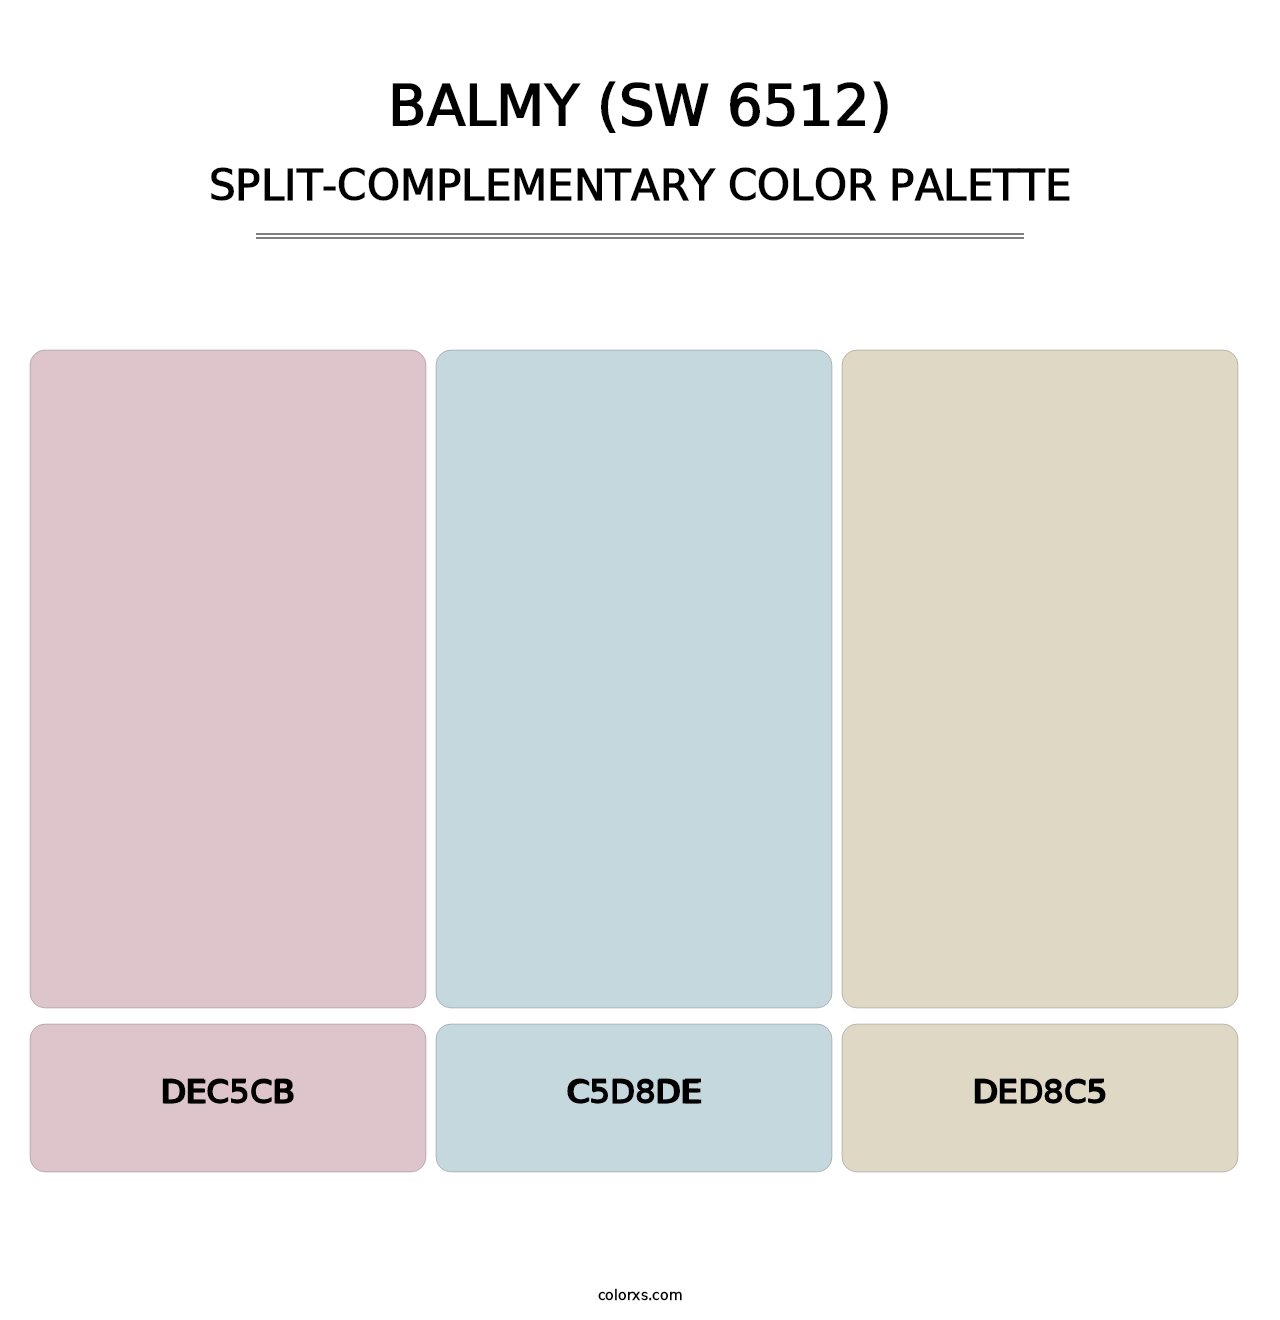 Balmy (SW 6512) - Split-Complementary Color Palette